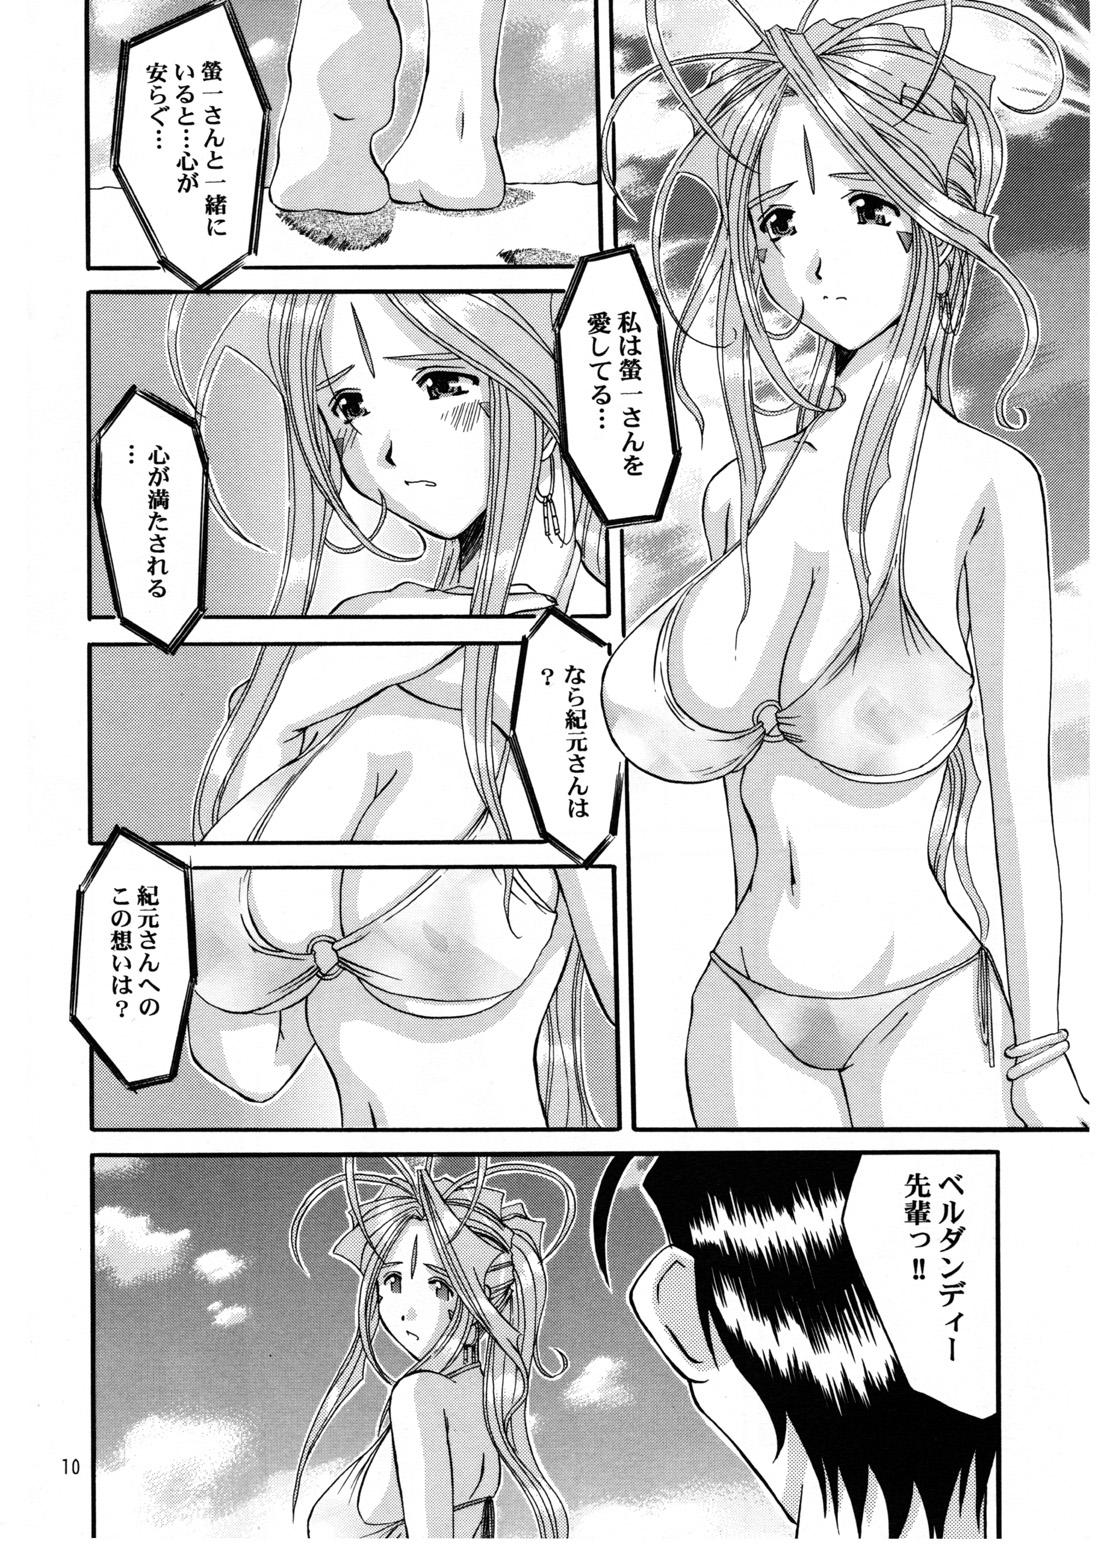 Ngentot Nightmare of My Goddess Summer Interval - Ah my goddess Cougars - Page 10